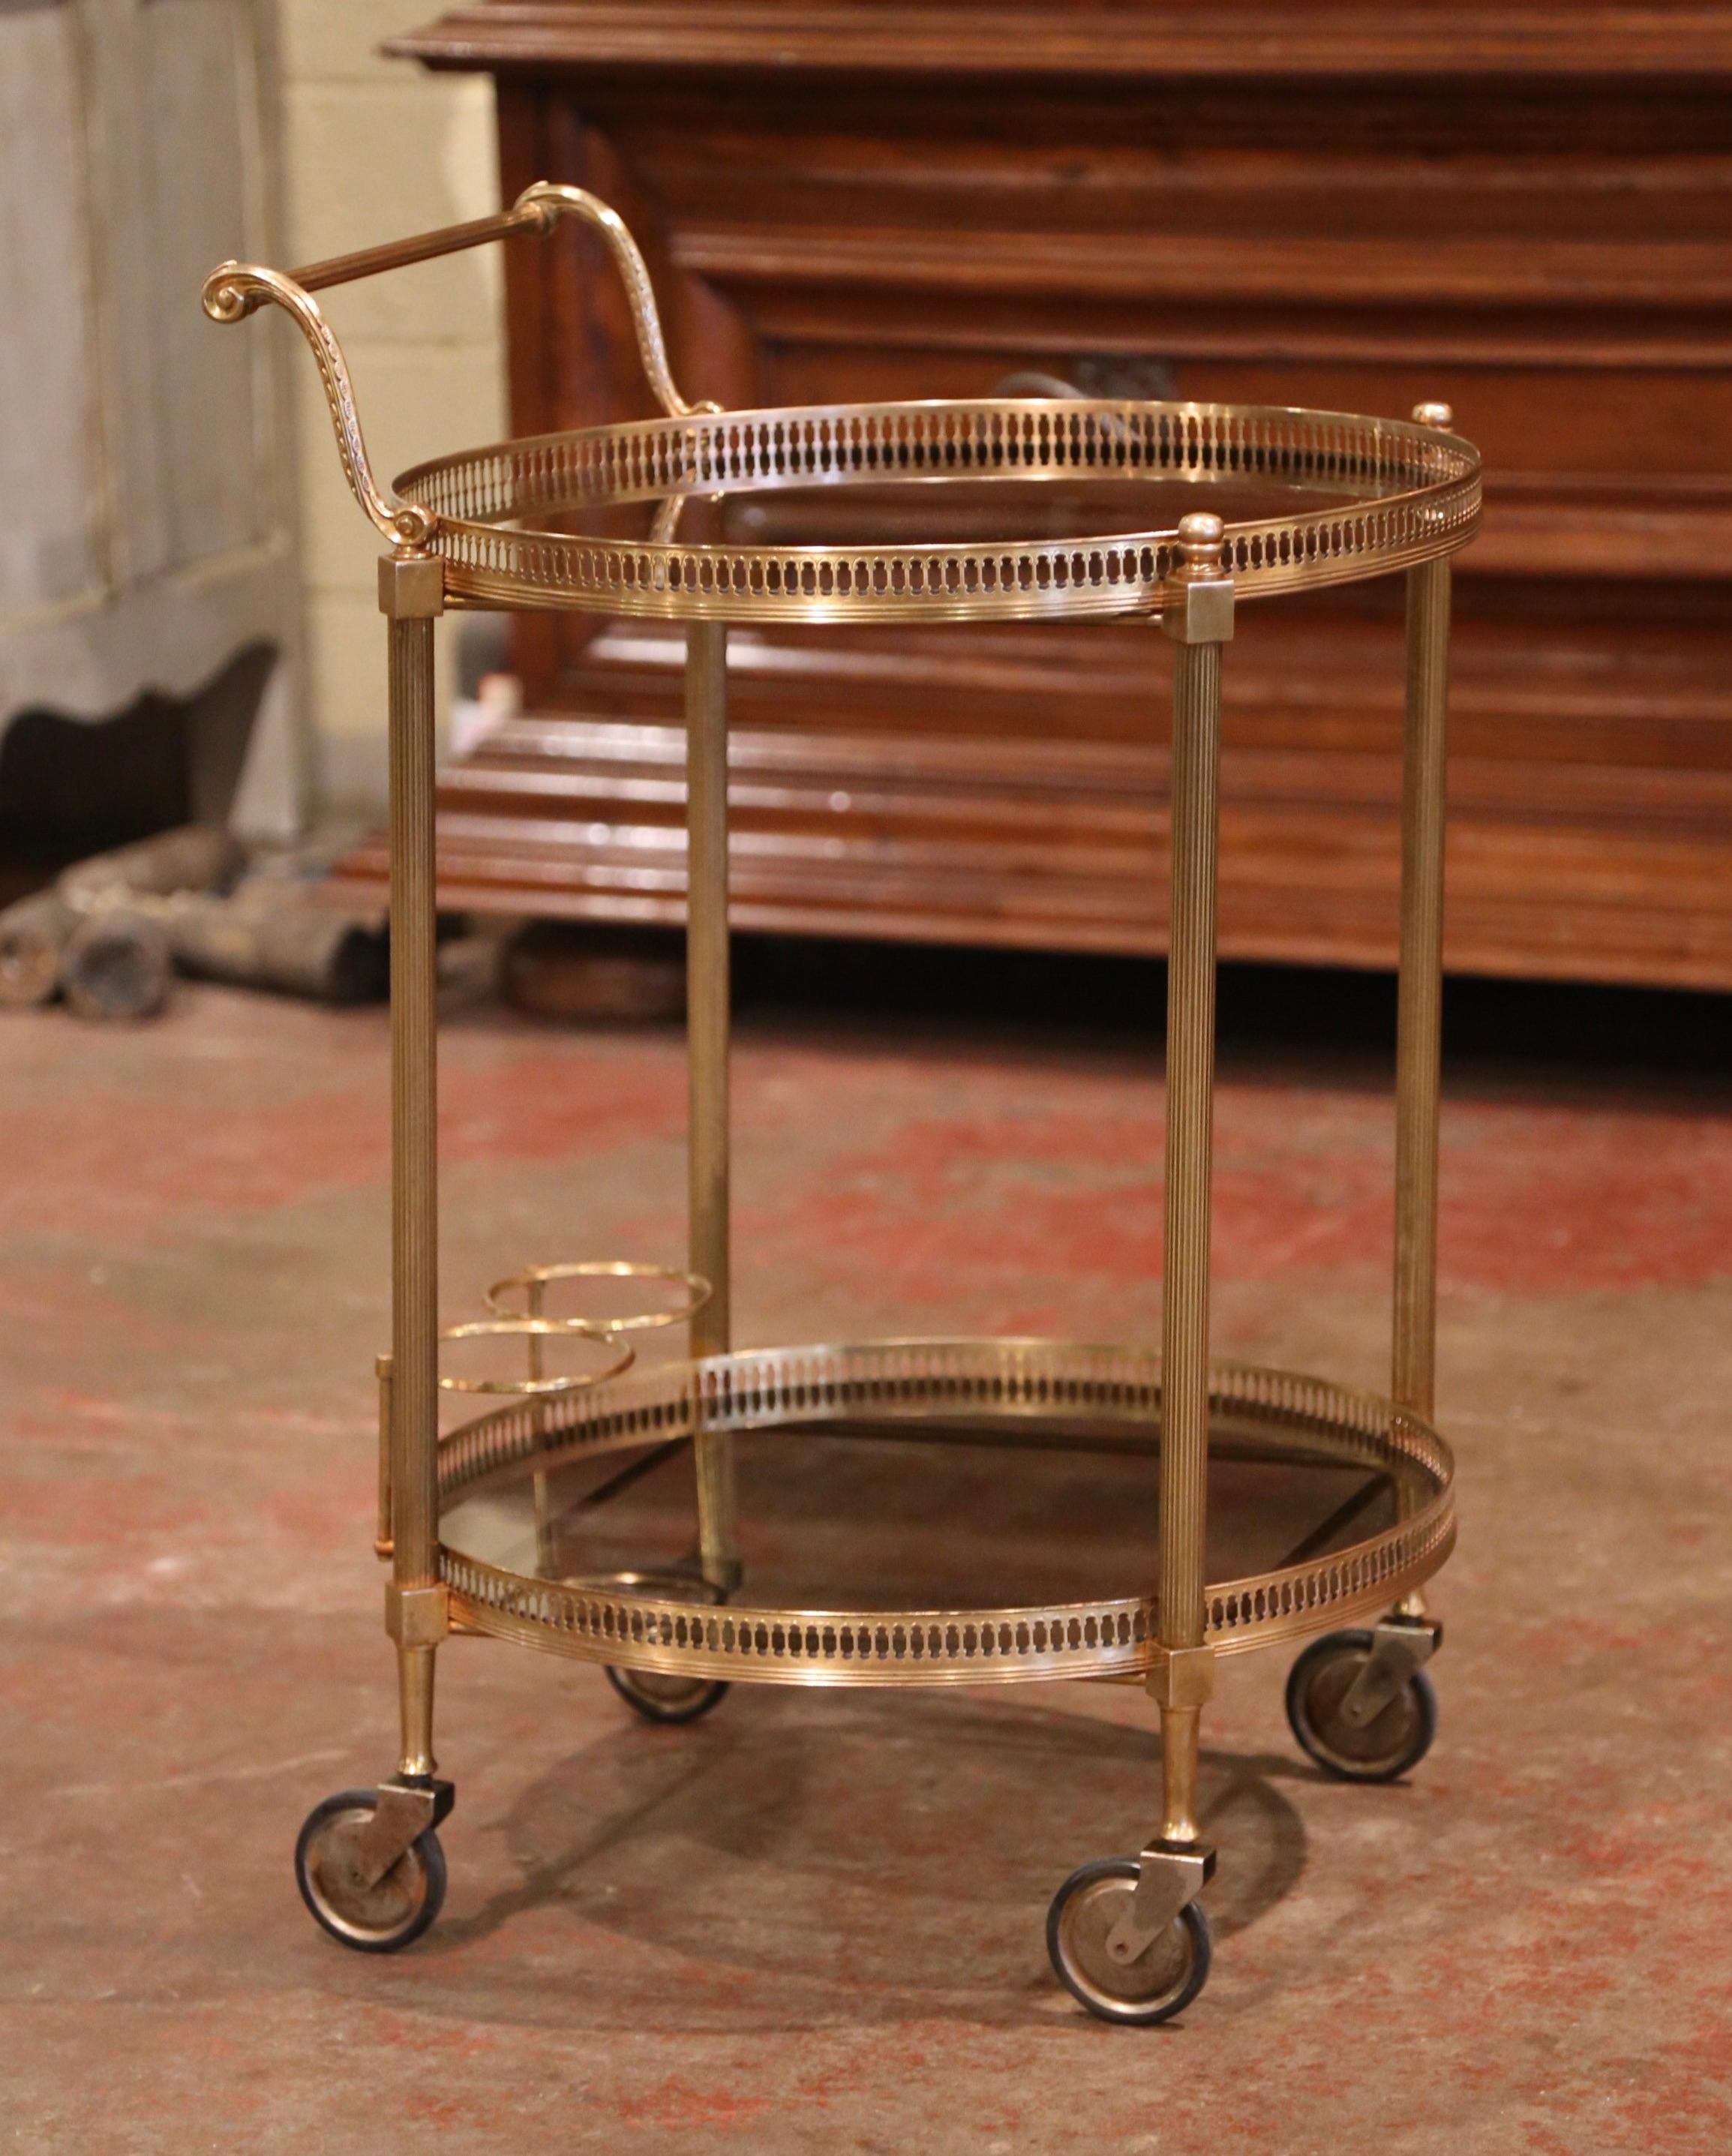 This elegant vintage rolling cart was created in France, circa 1930, the brass bar table stands on small round wheels over four straight spline legs decorated at the center. The cart features two plateaus both topped with tainted glass surfaces; the